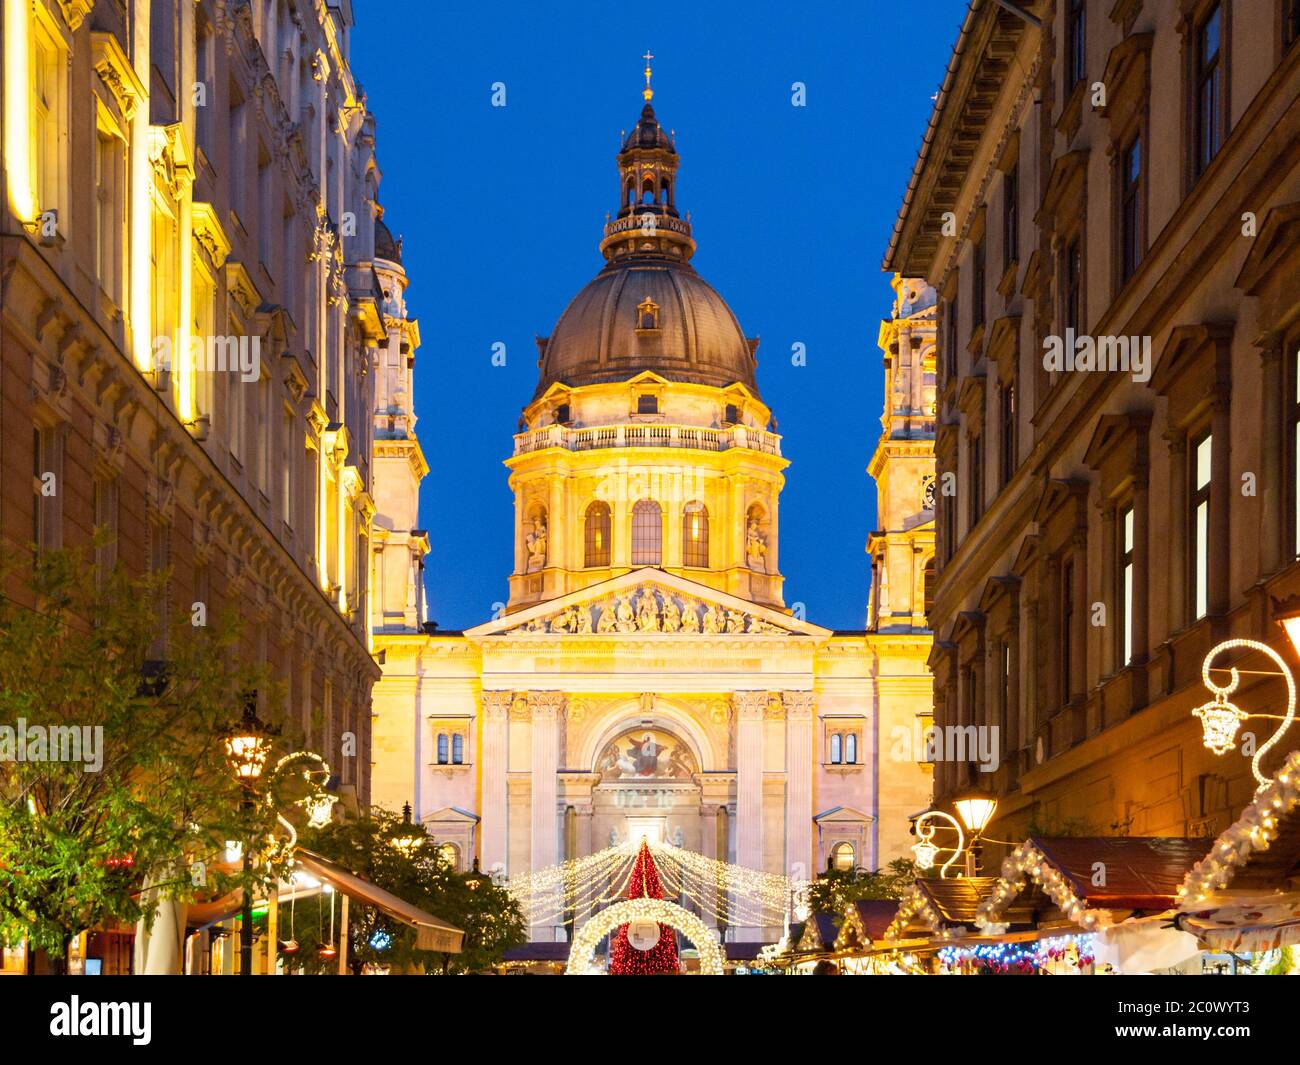 Christmas time in Budapest. Illuminated dome of Saint Stephen's Basilica with holiday street decoration in Zrinyi Street by night. UNESCO World Heritage Site Budapest, Hungary, Europe. Stock Photo